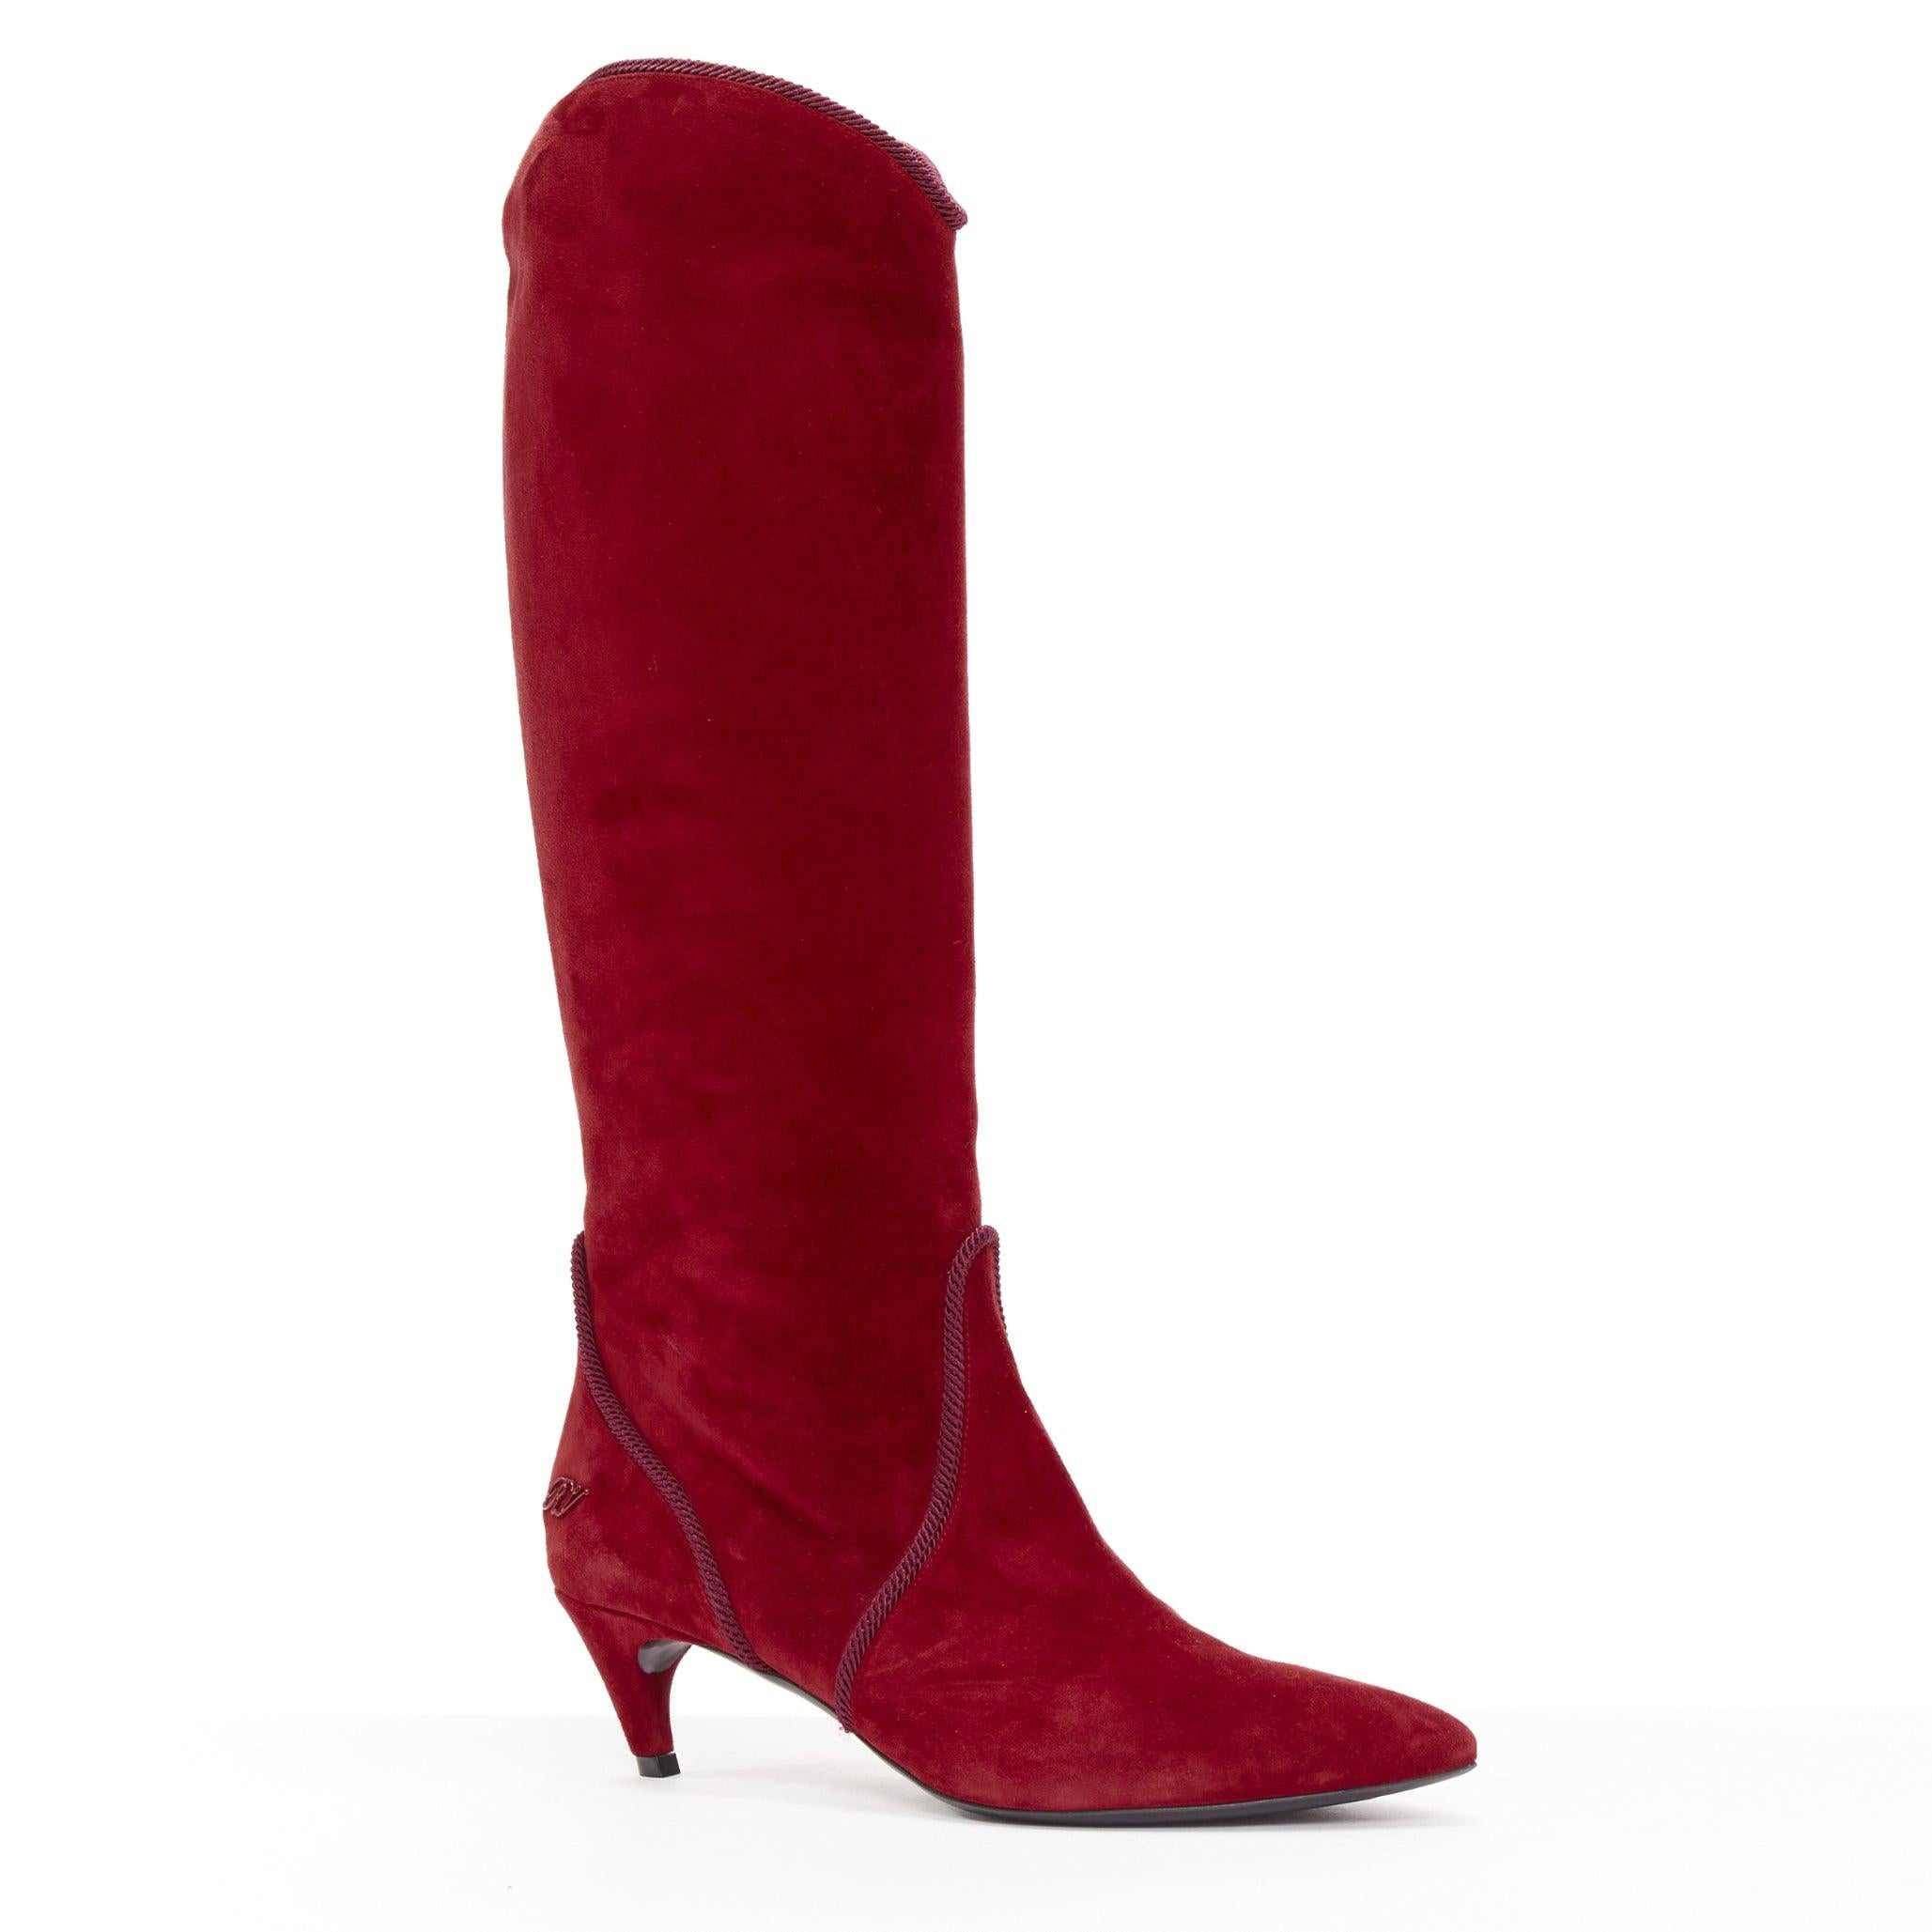 ROGER VIVIER red suede purple piping RV charm kitten heel cowboy boot EU37.5
Reference: NKLL/A00093
Brand: Roger Vivier
Material: Suede
Color: Red, Purple
Pattern: Solid
Closure: Pull On
Extra Details: Red suede with purple braid piping detail.